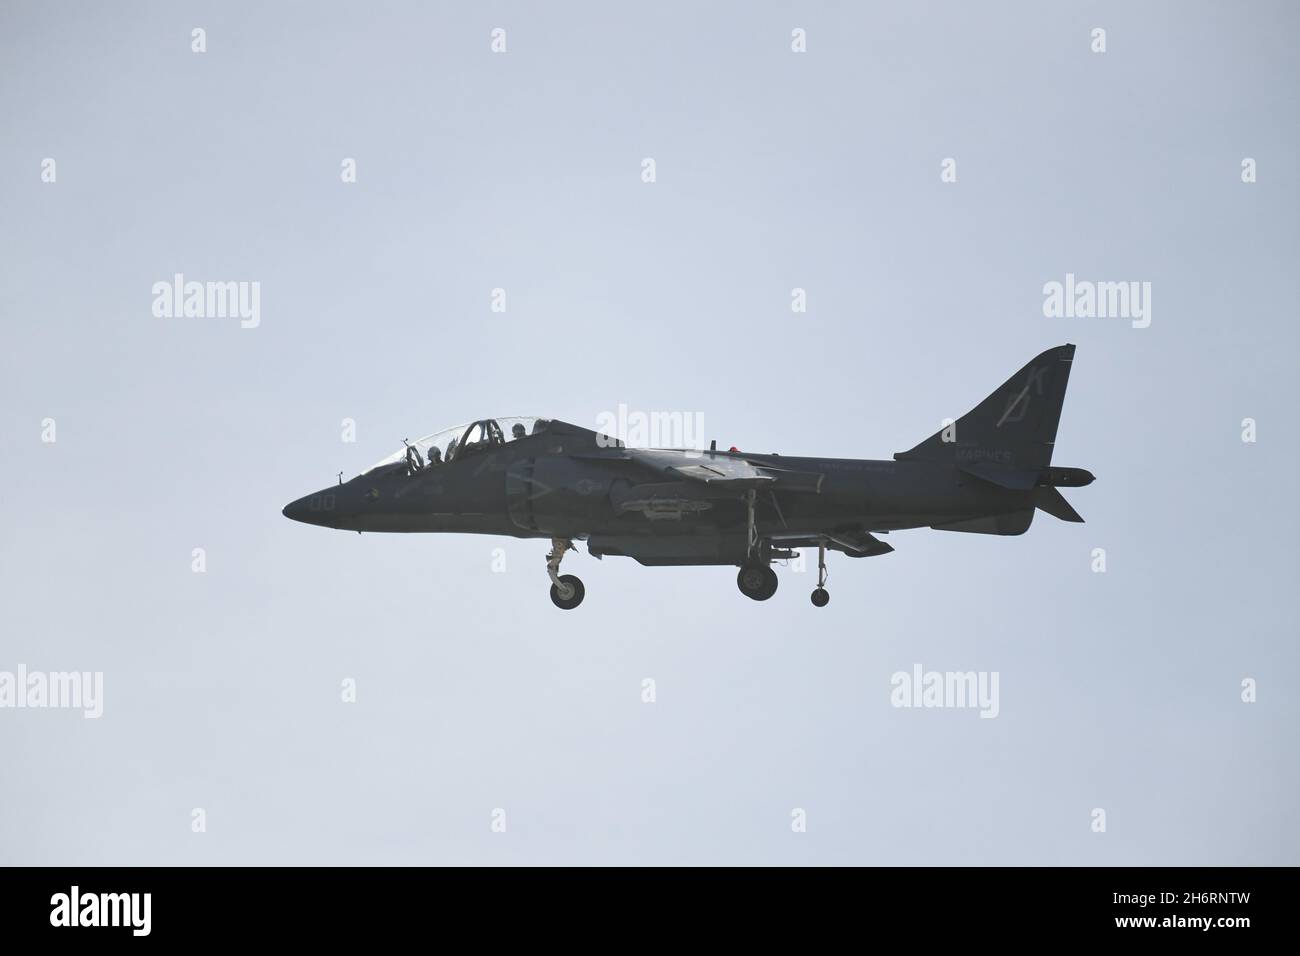 T/AV-8B Harrier, from MCAS Yuma, working the pattern during training at NAF El Centro, California Stock Photo